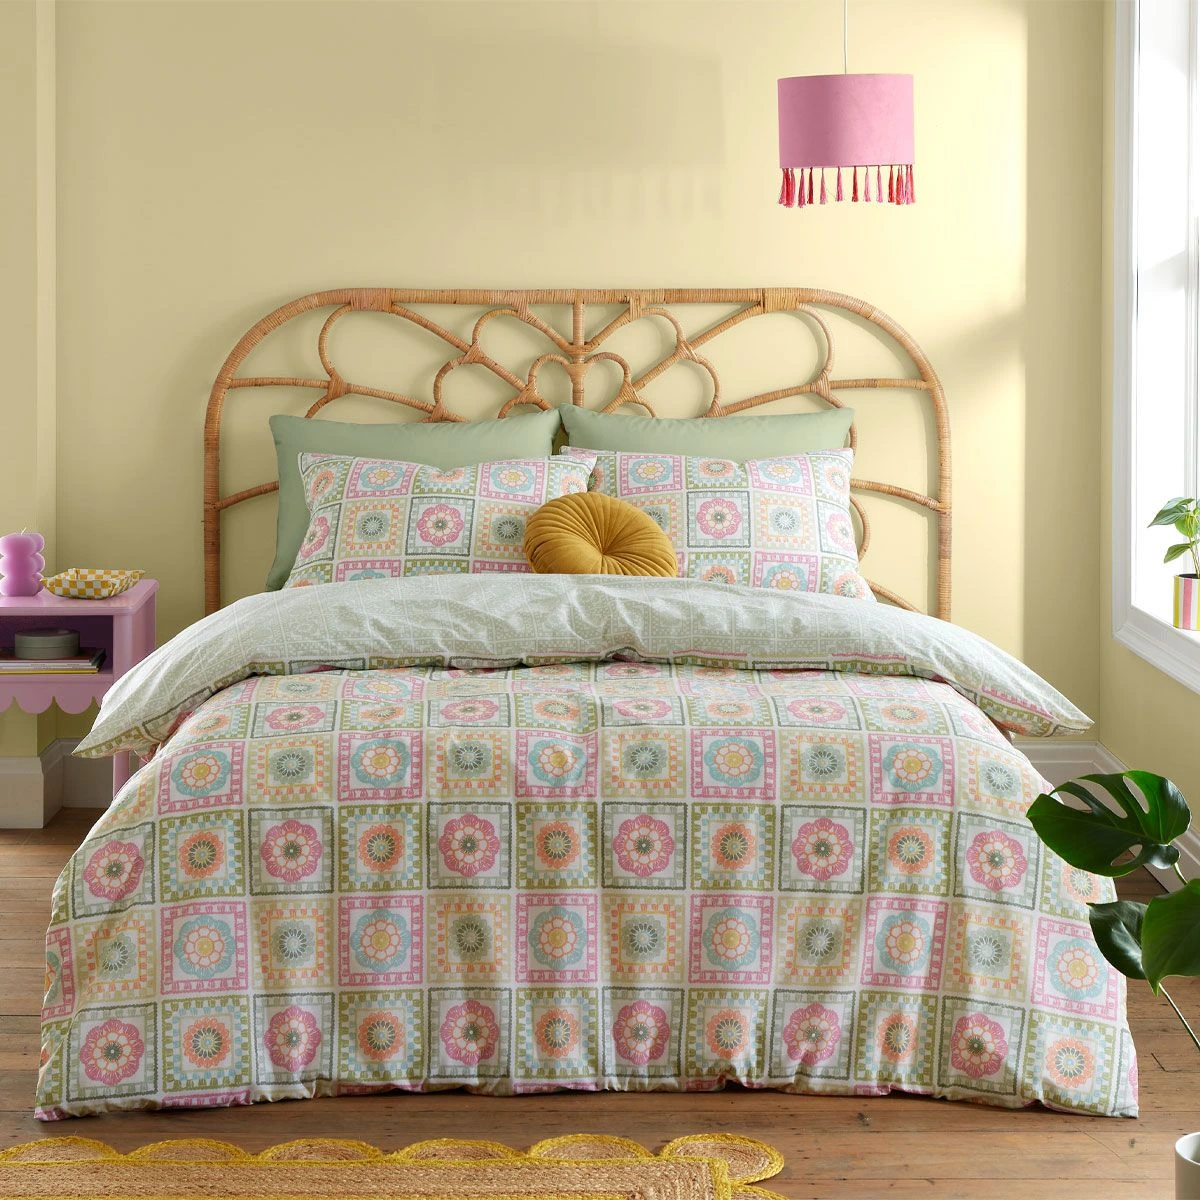 Winter Fun Pastel Duvet Set by Catherine Lansfield - The Curtain Store at  Home